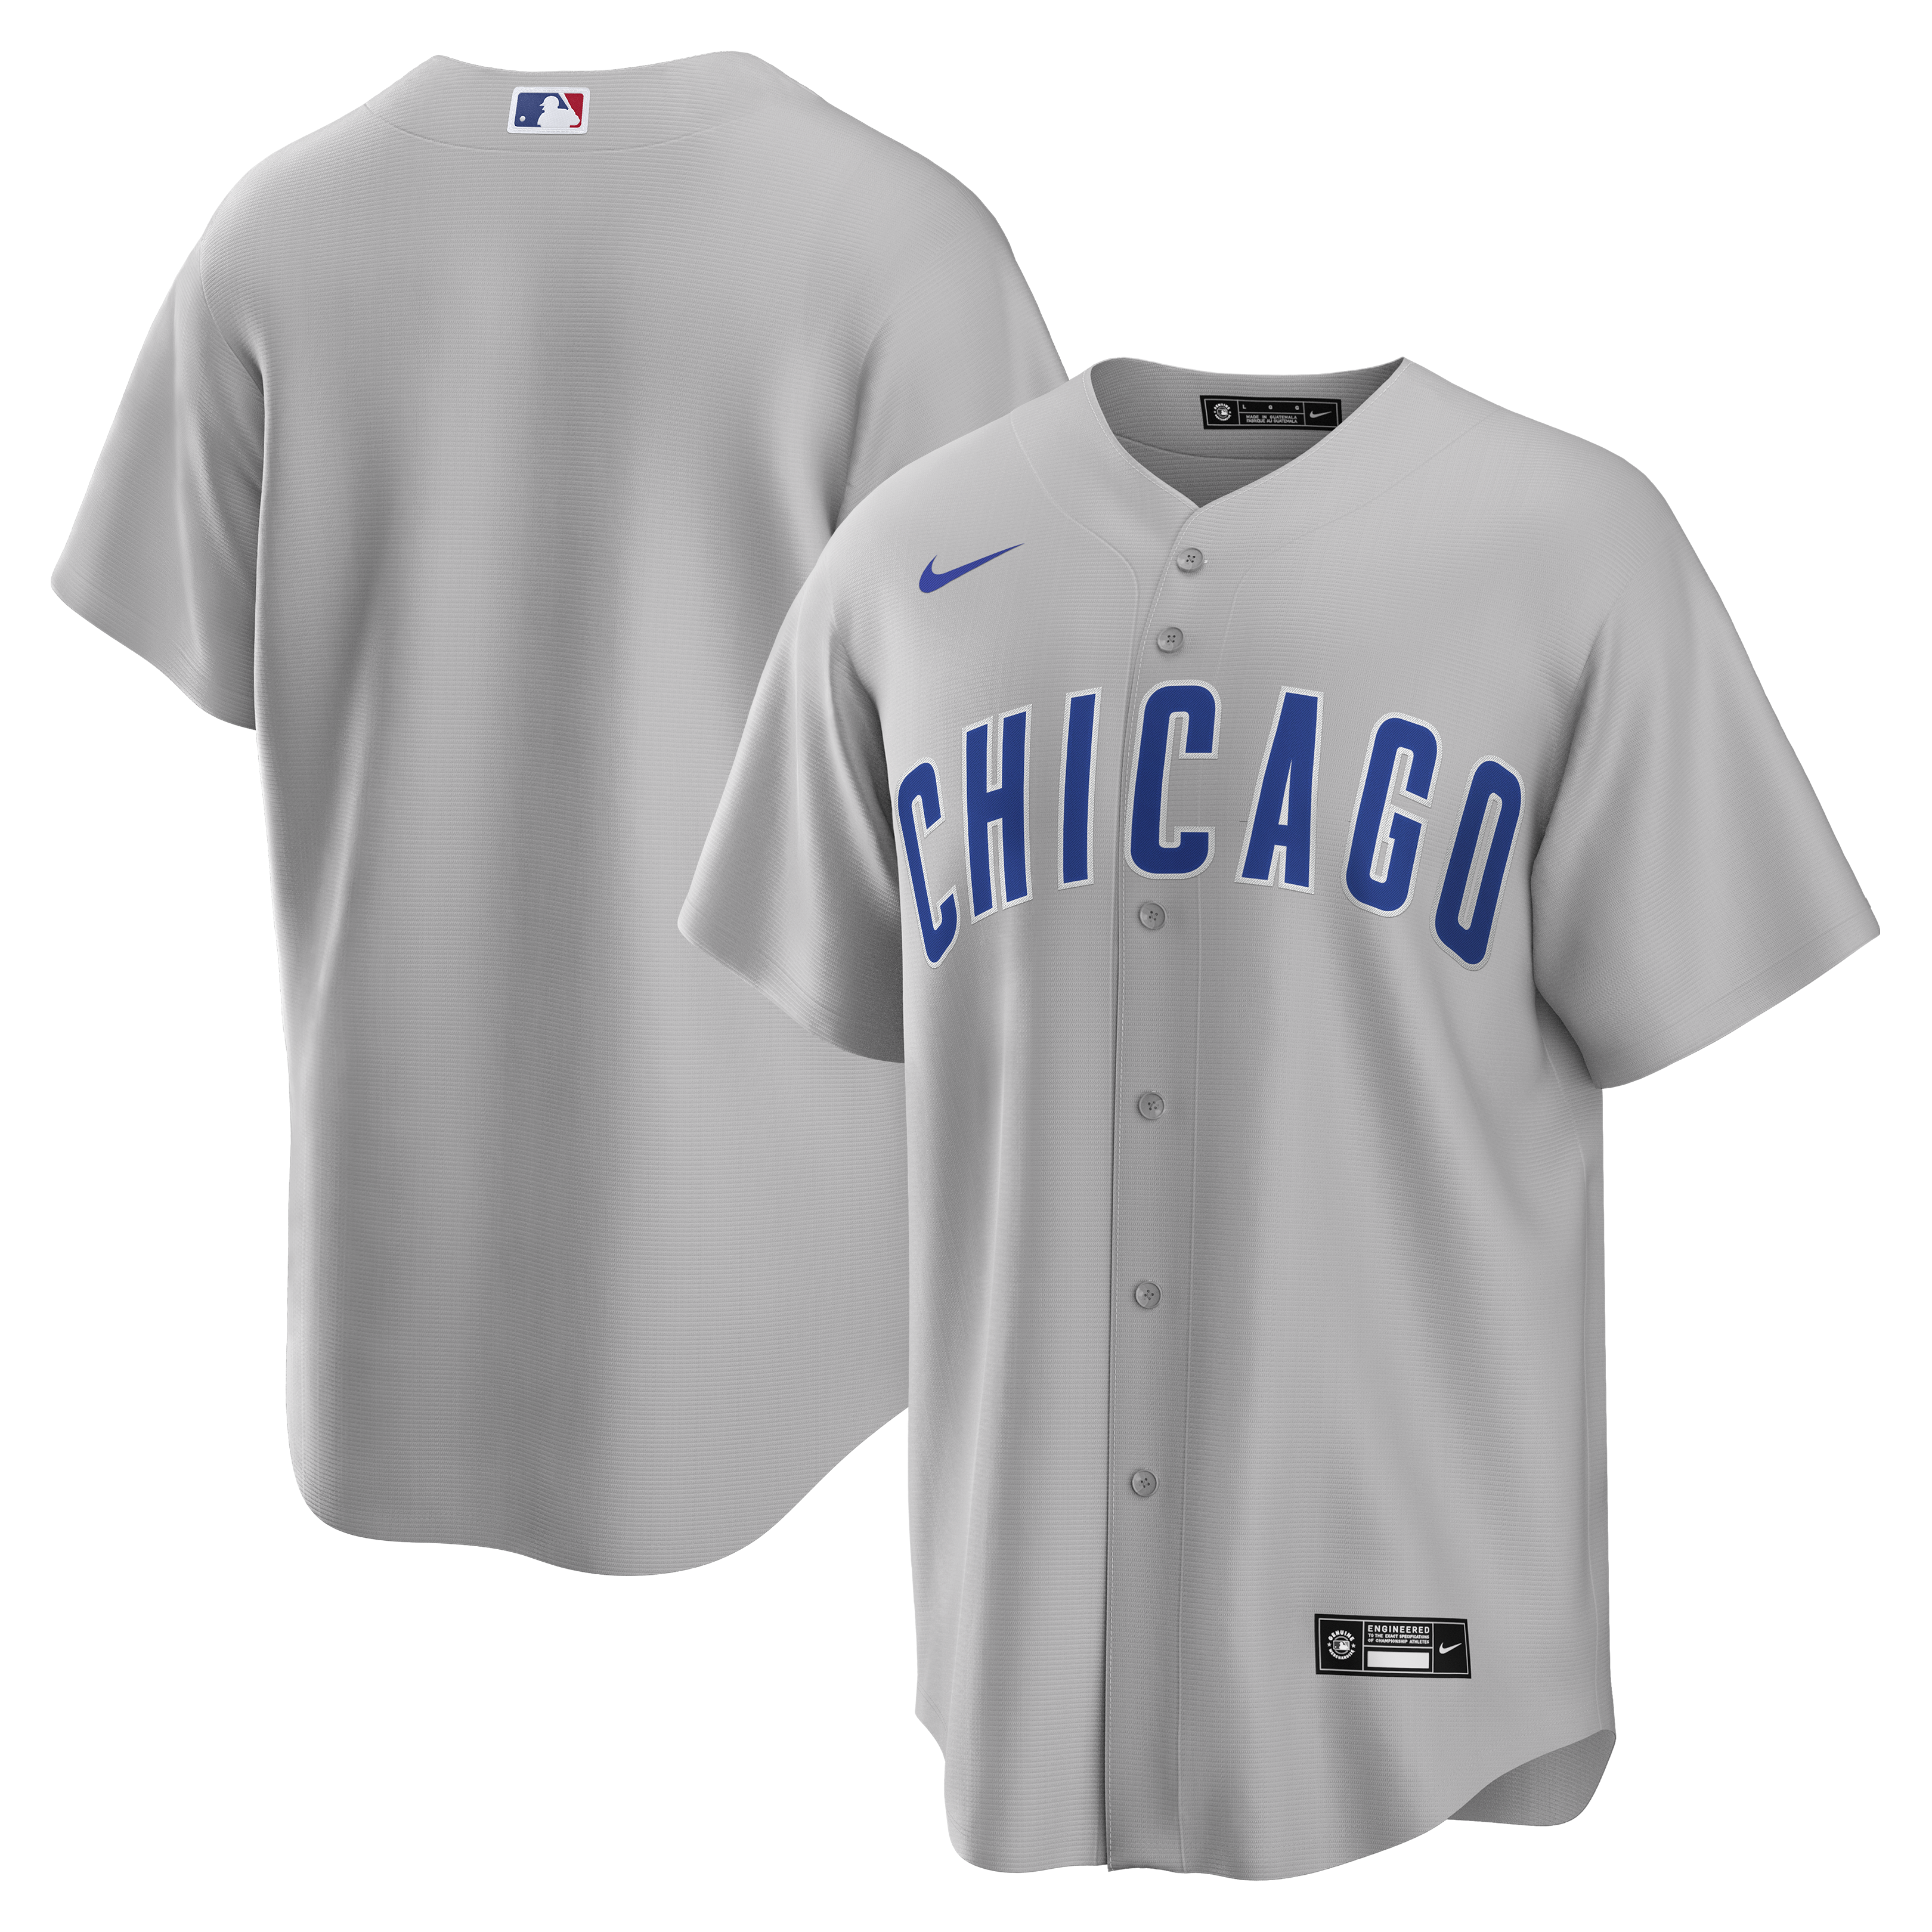 Chicago Cubs and White Sox Fans Can Make Their Own Nikes